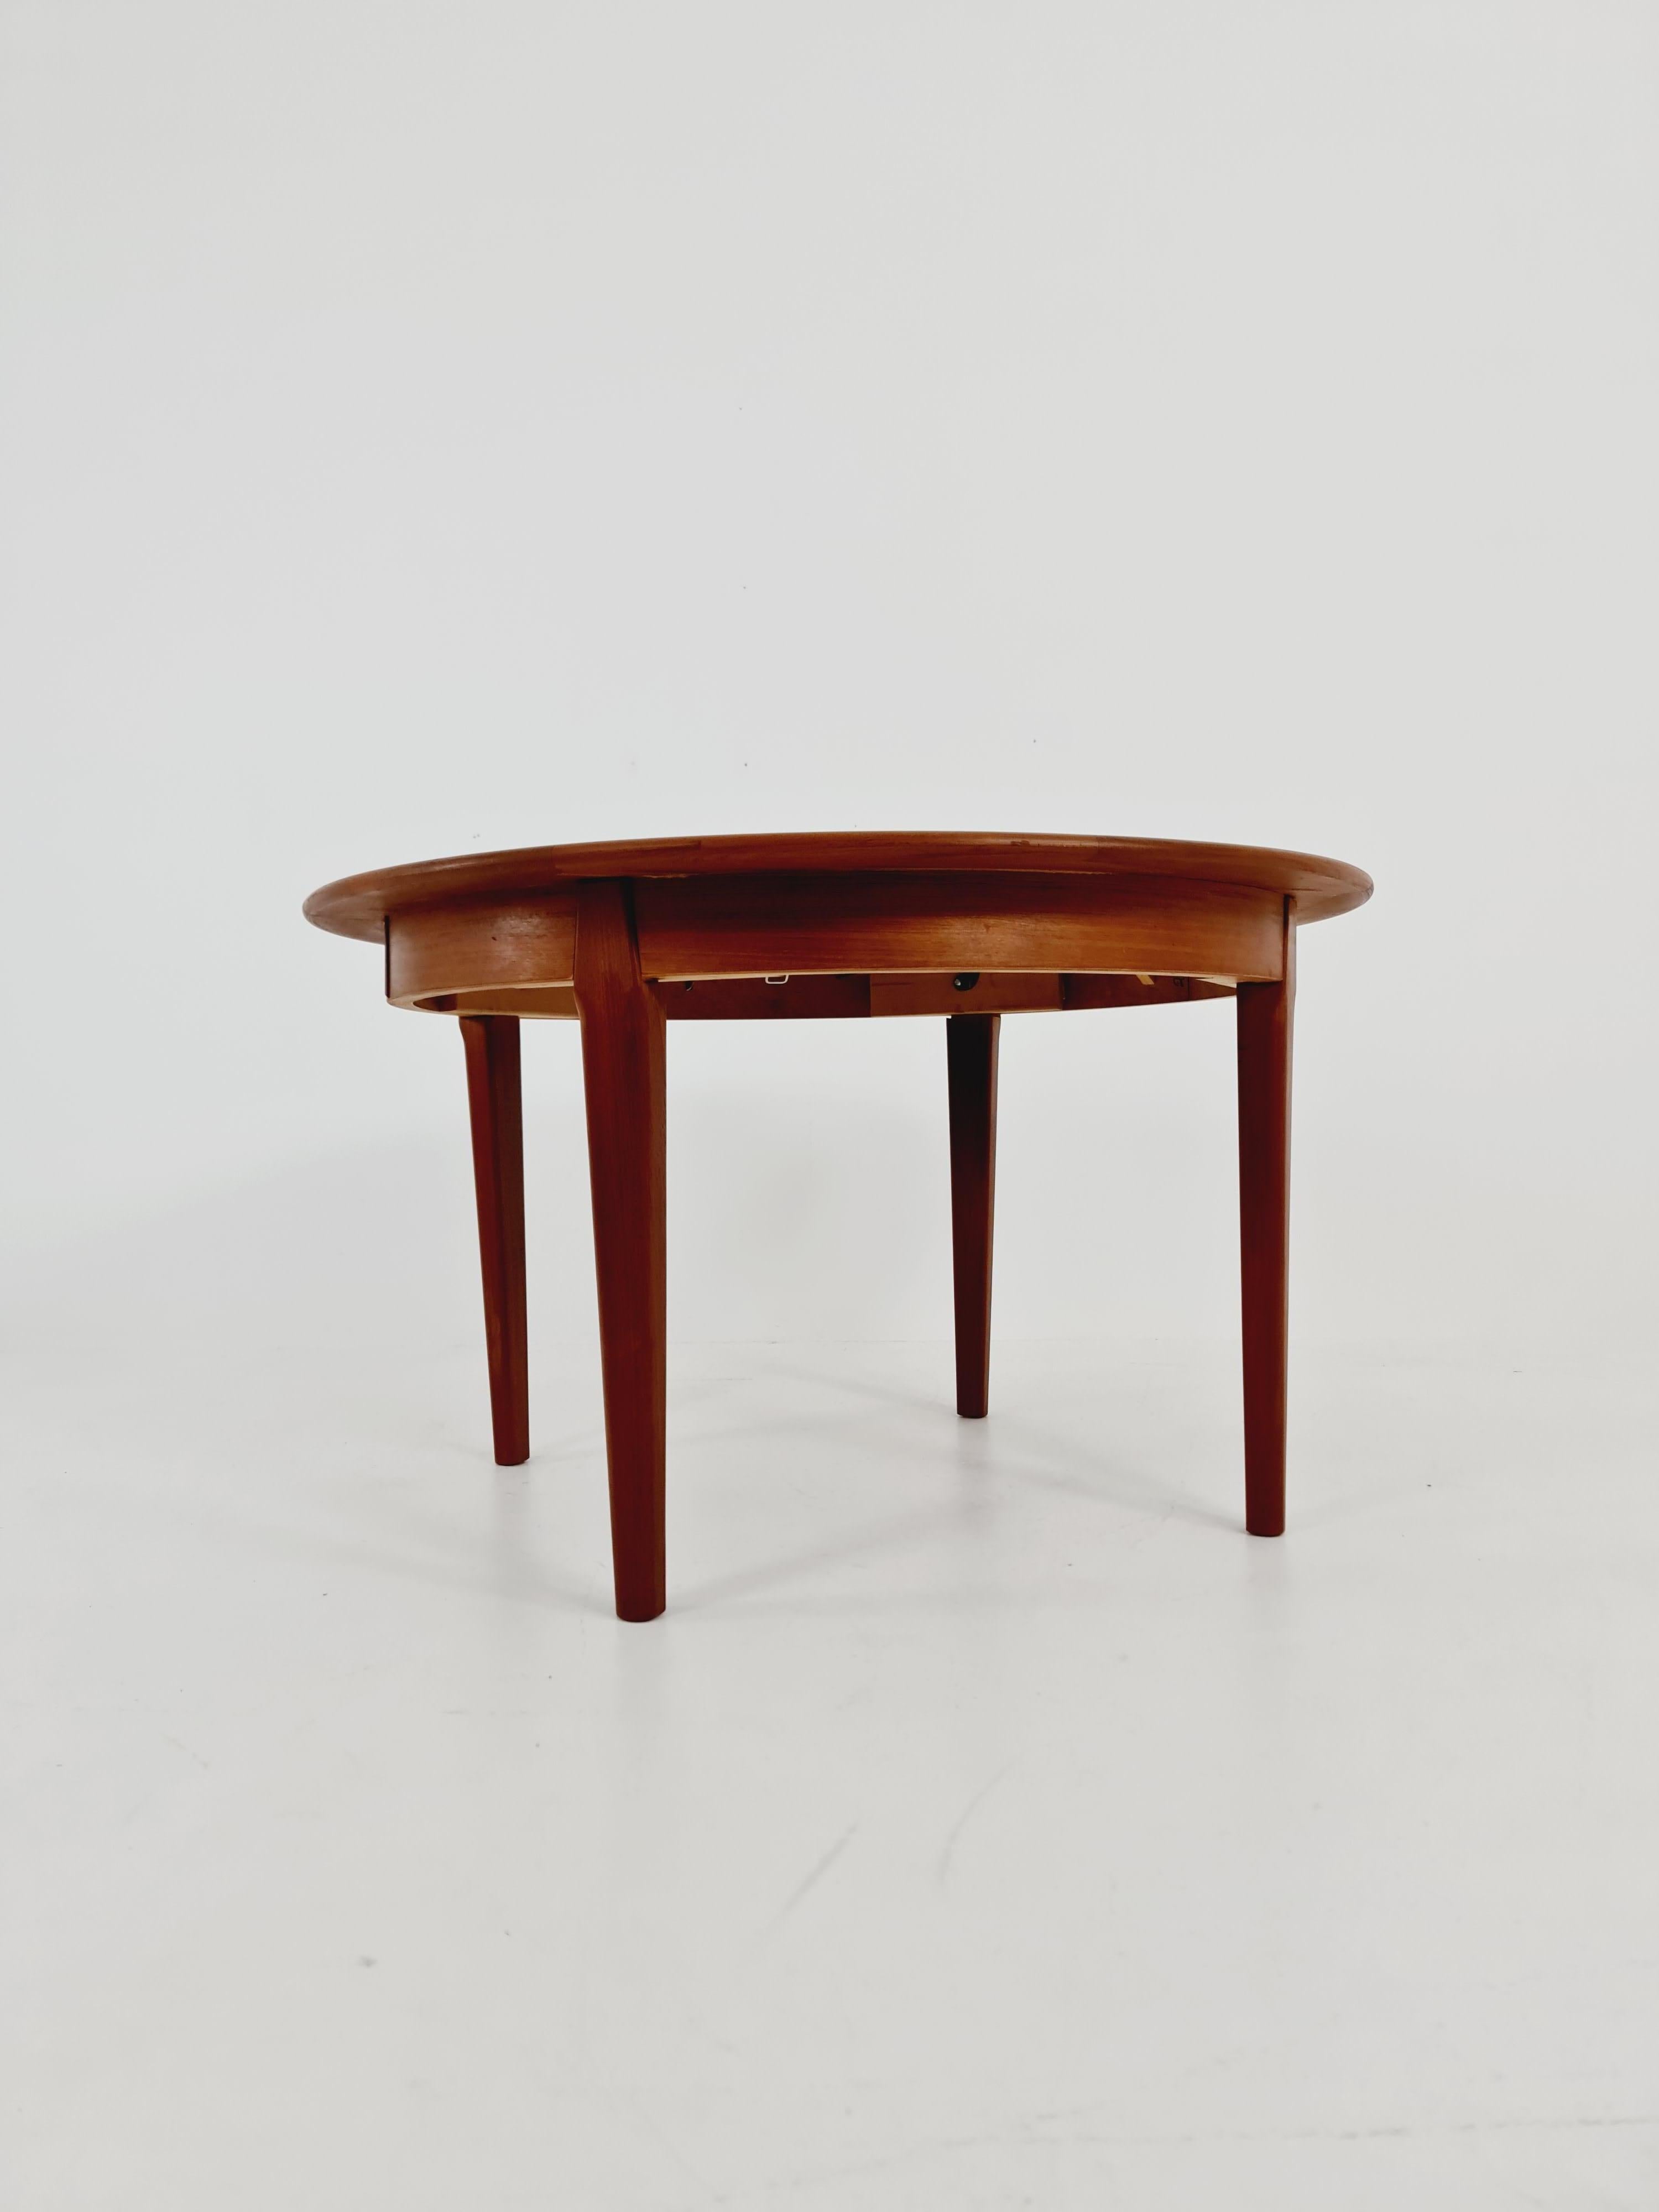 Danish Modern Falster Teak Expandable Dining Table In Good Condition For Sale In Gaggenau, DE